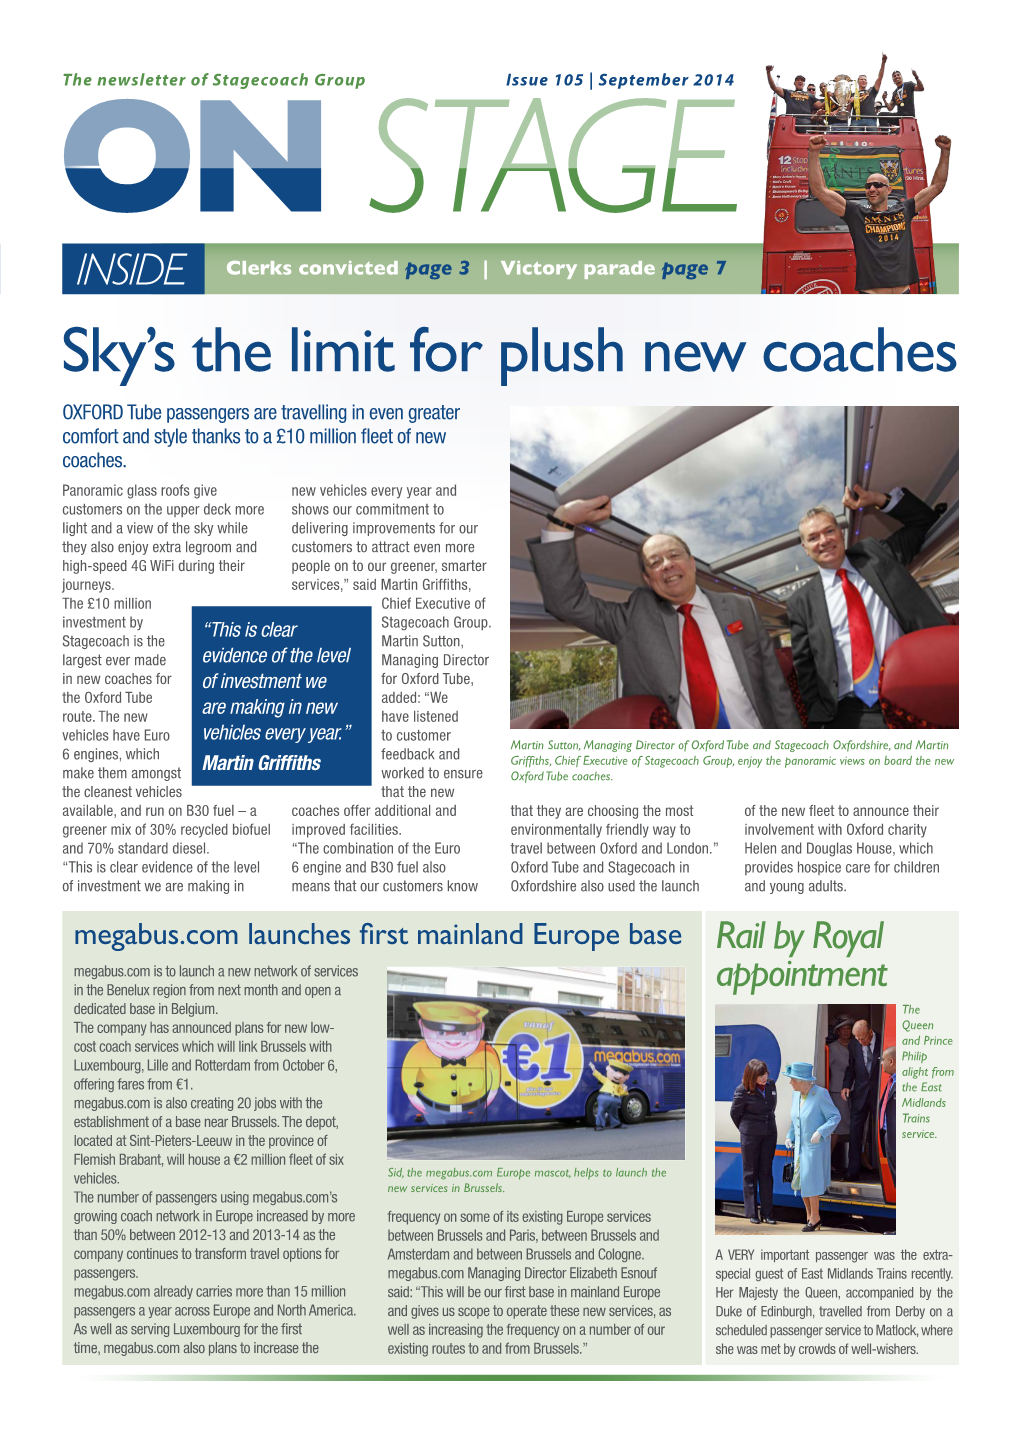 Sky's the Limit for Plush New Coaches